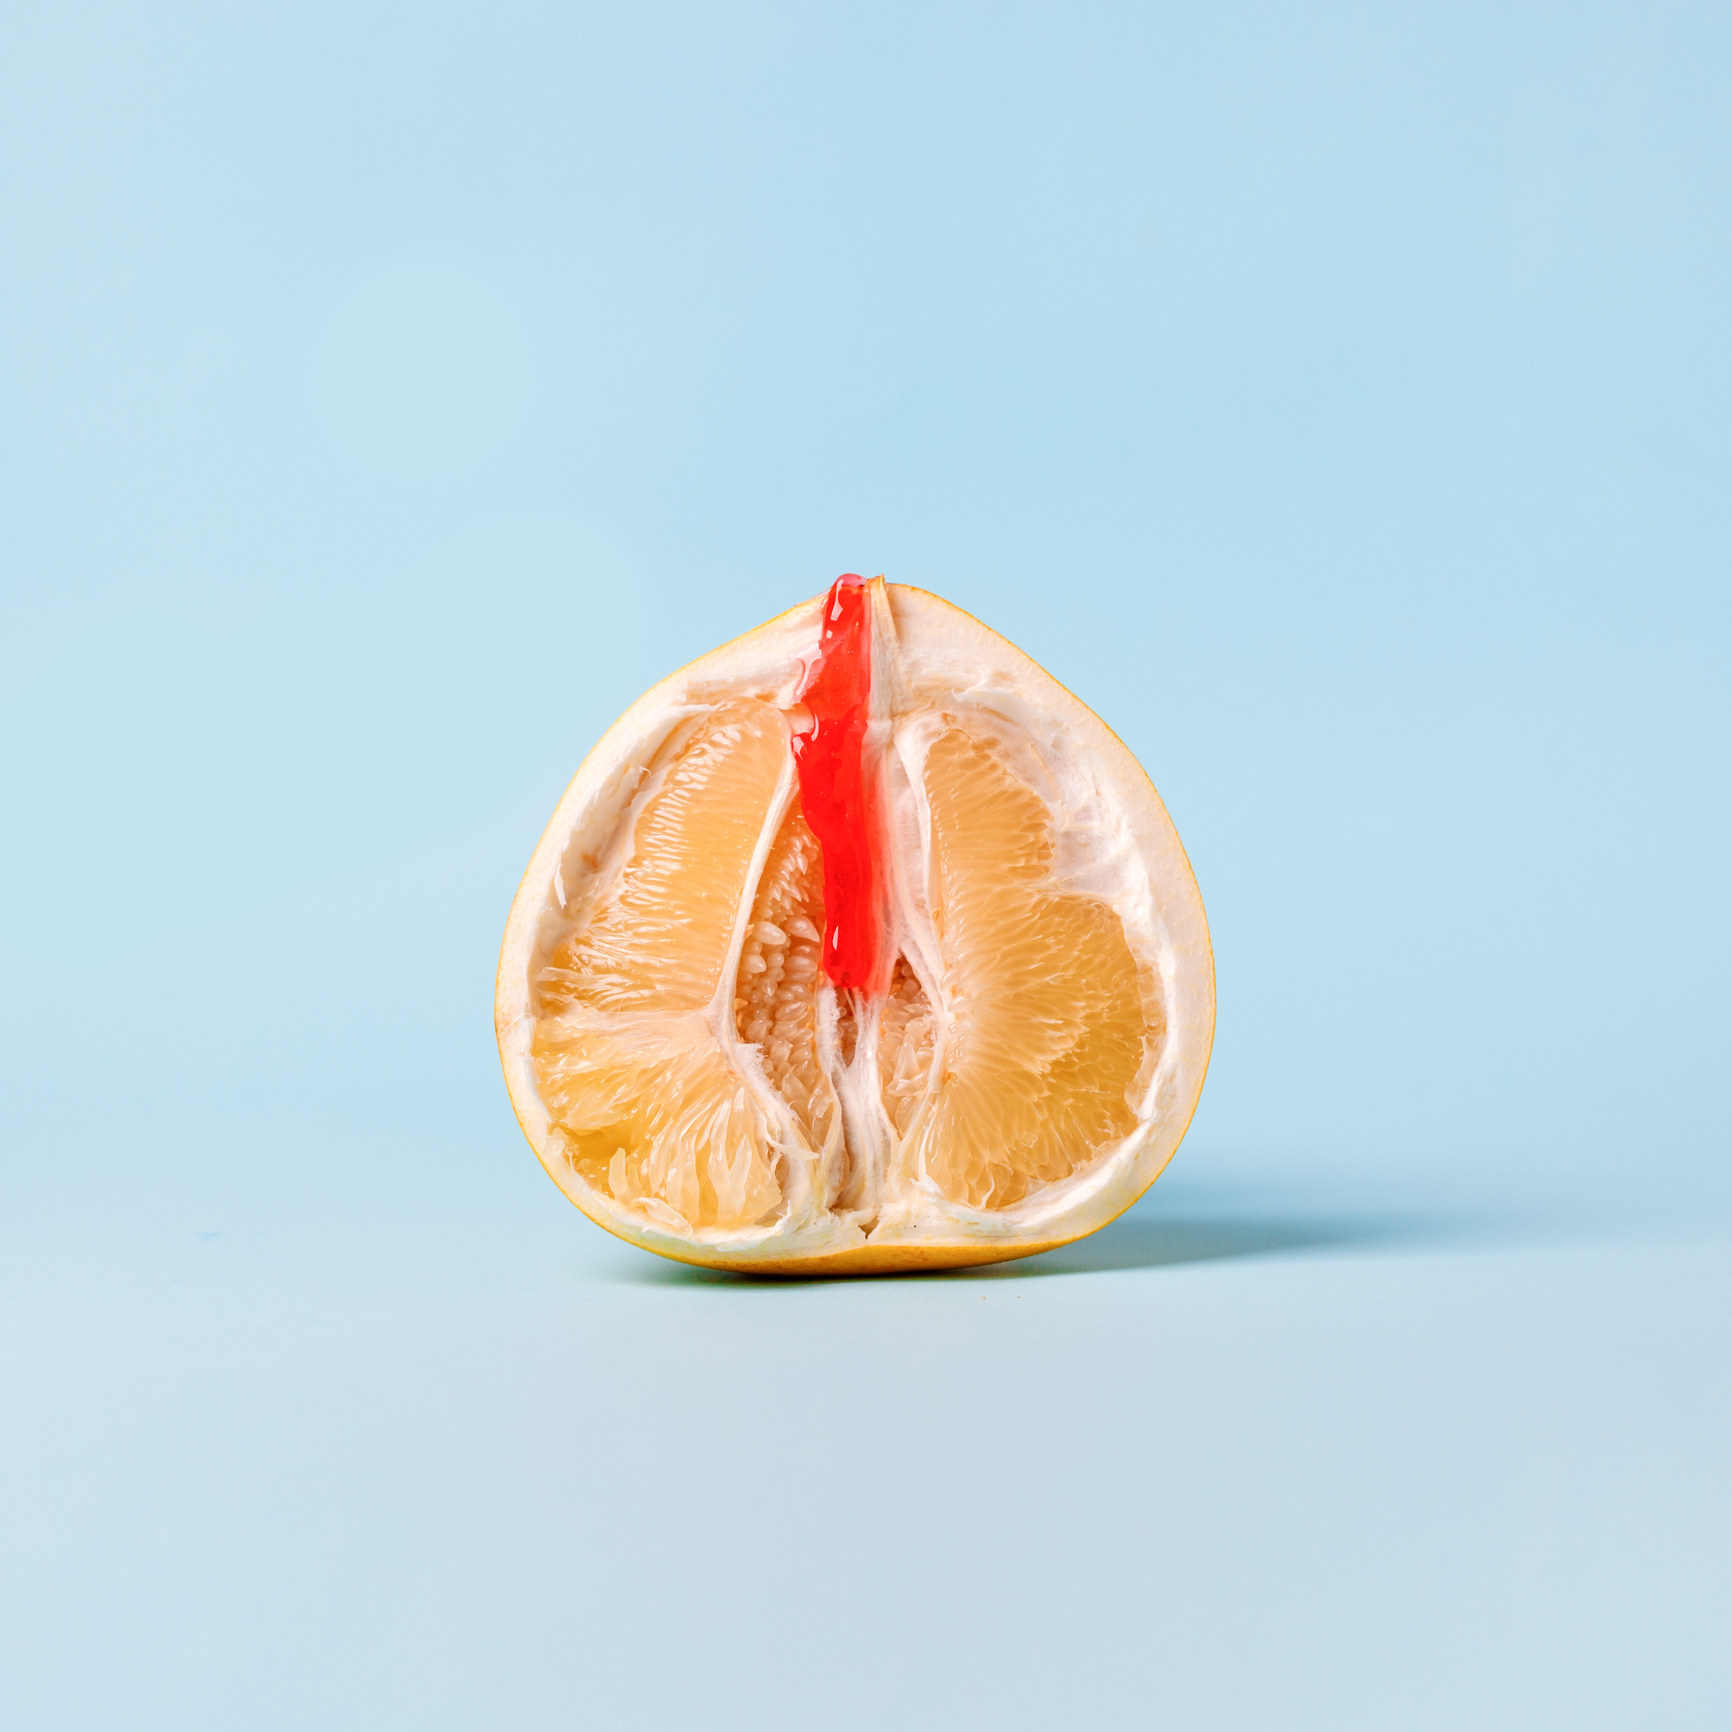 Stock image of a fruit with a red stripe depicting blood